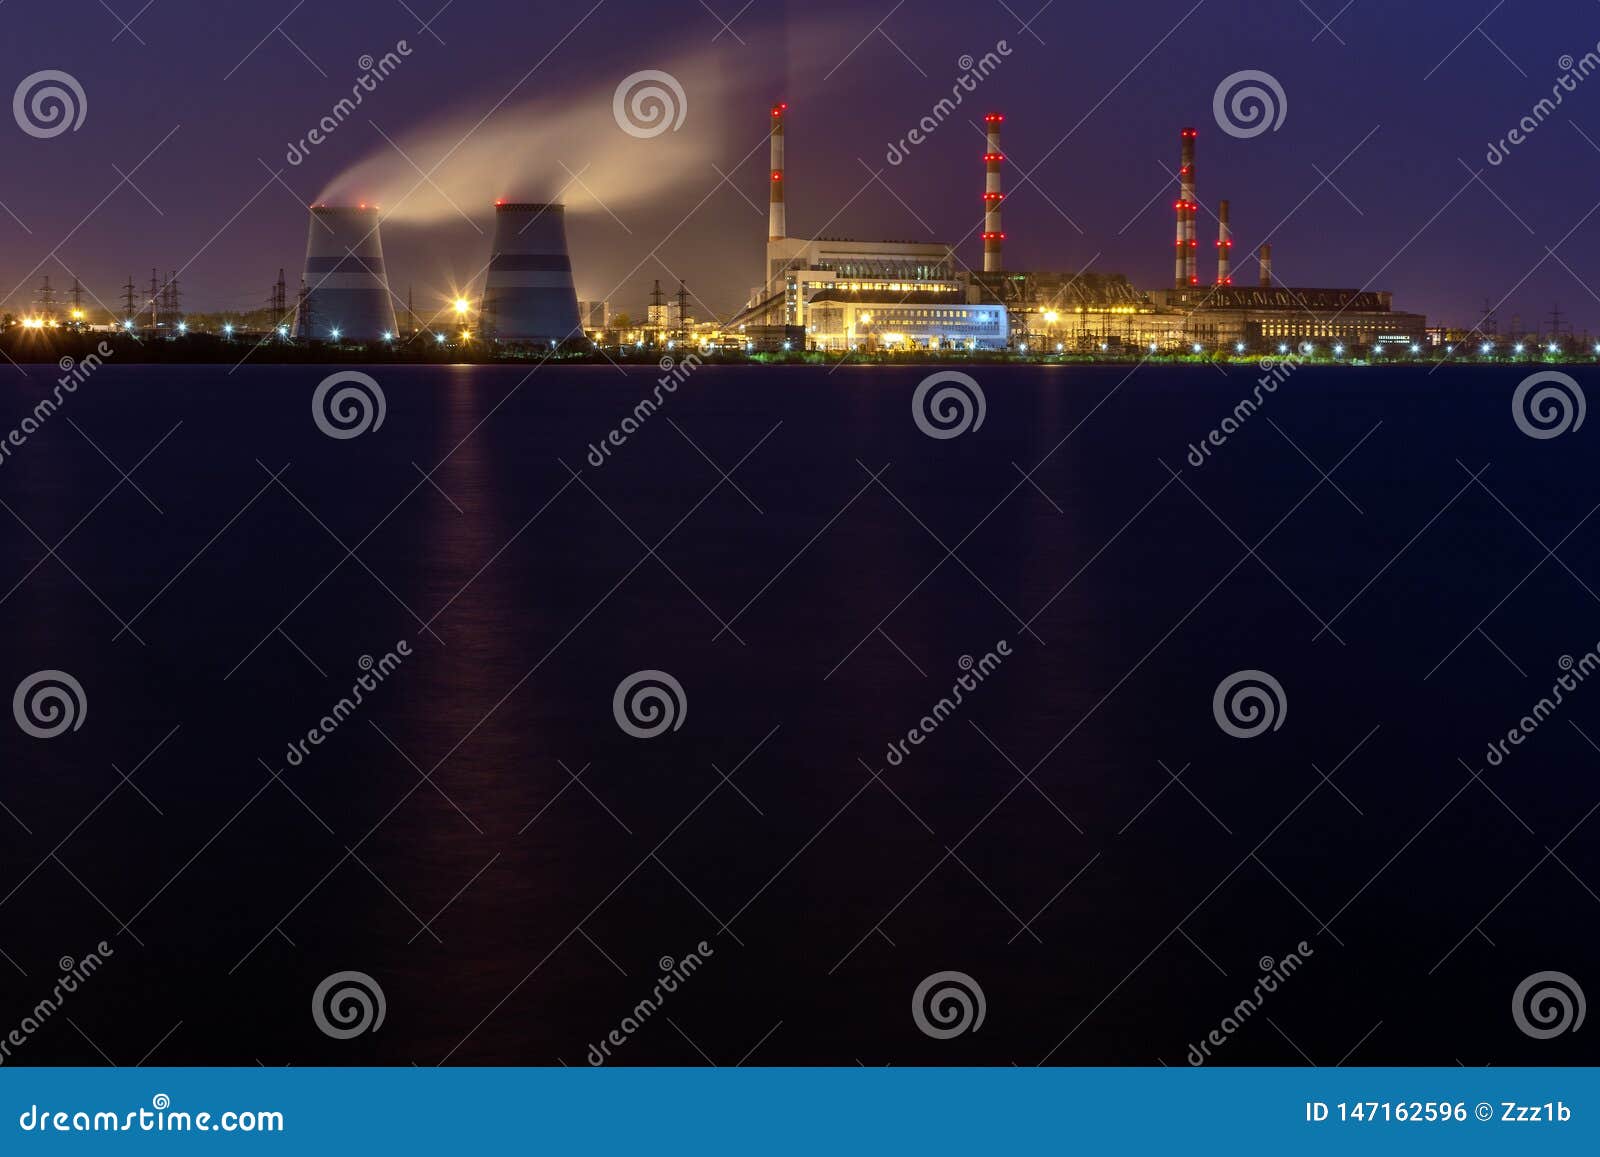 old thermal 450 megawatt power plant at night with artificial lake on foreground